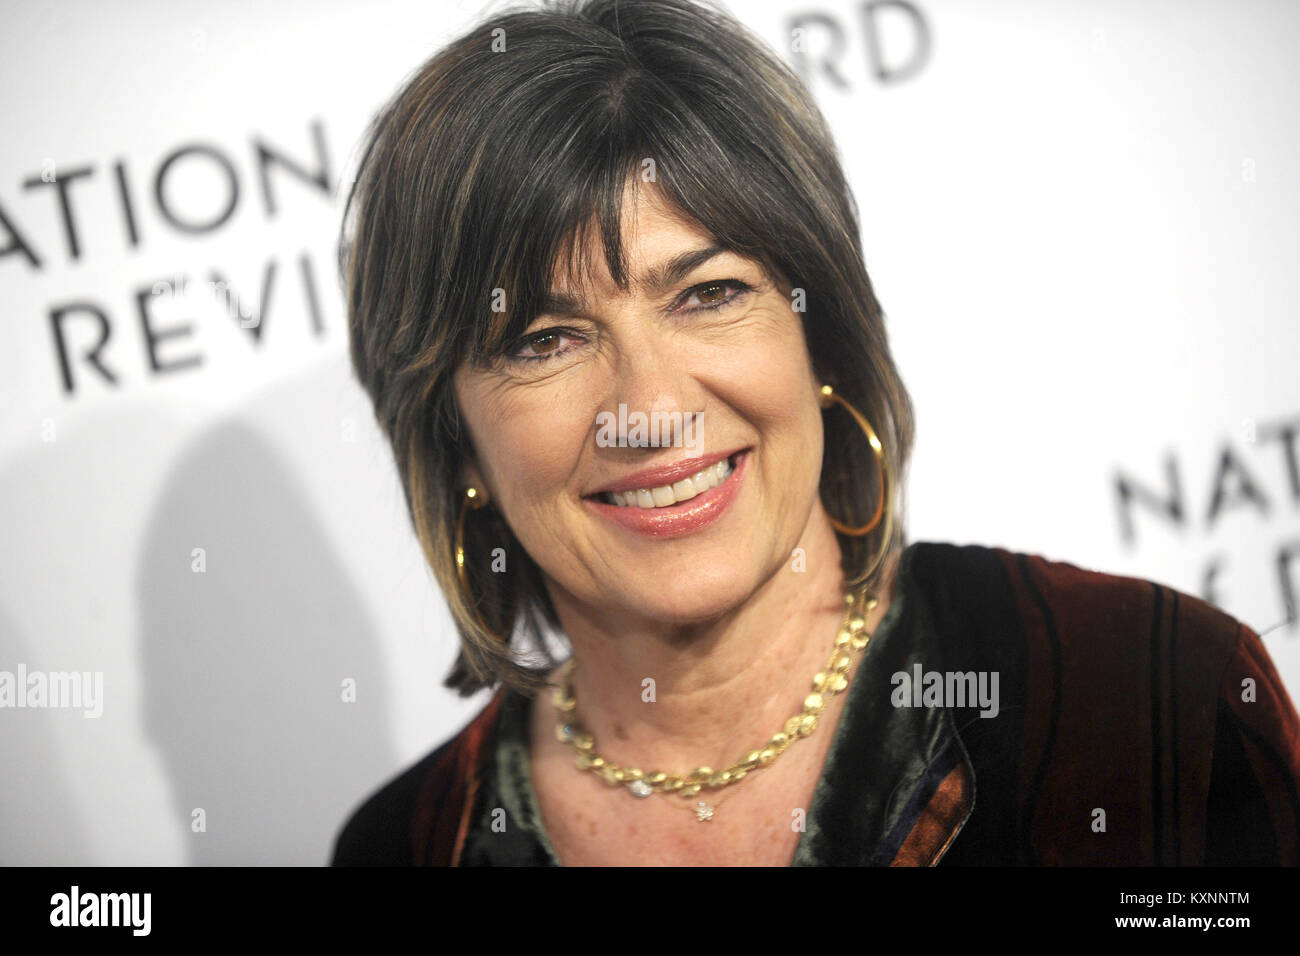 Christiane Amanpour attends the National Board of Review Annual Awards Gala at Cipriani 42nd Street on January 9, 2018 in New York City. | Verwendung weltweit Stock Photo